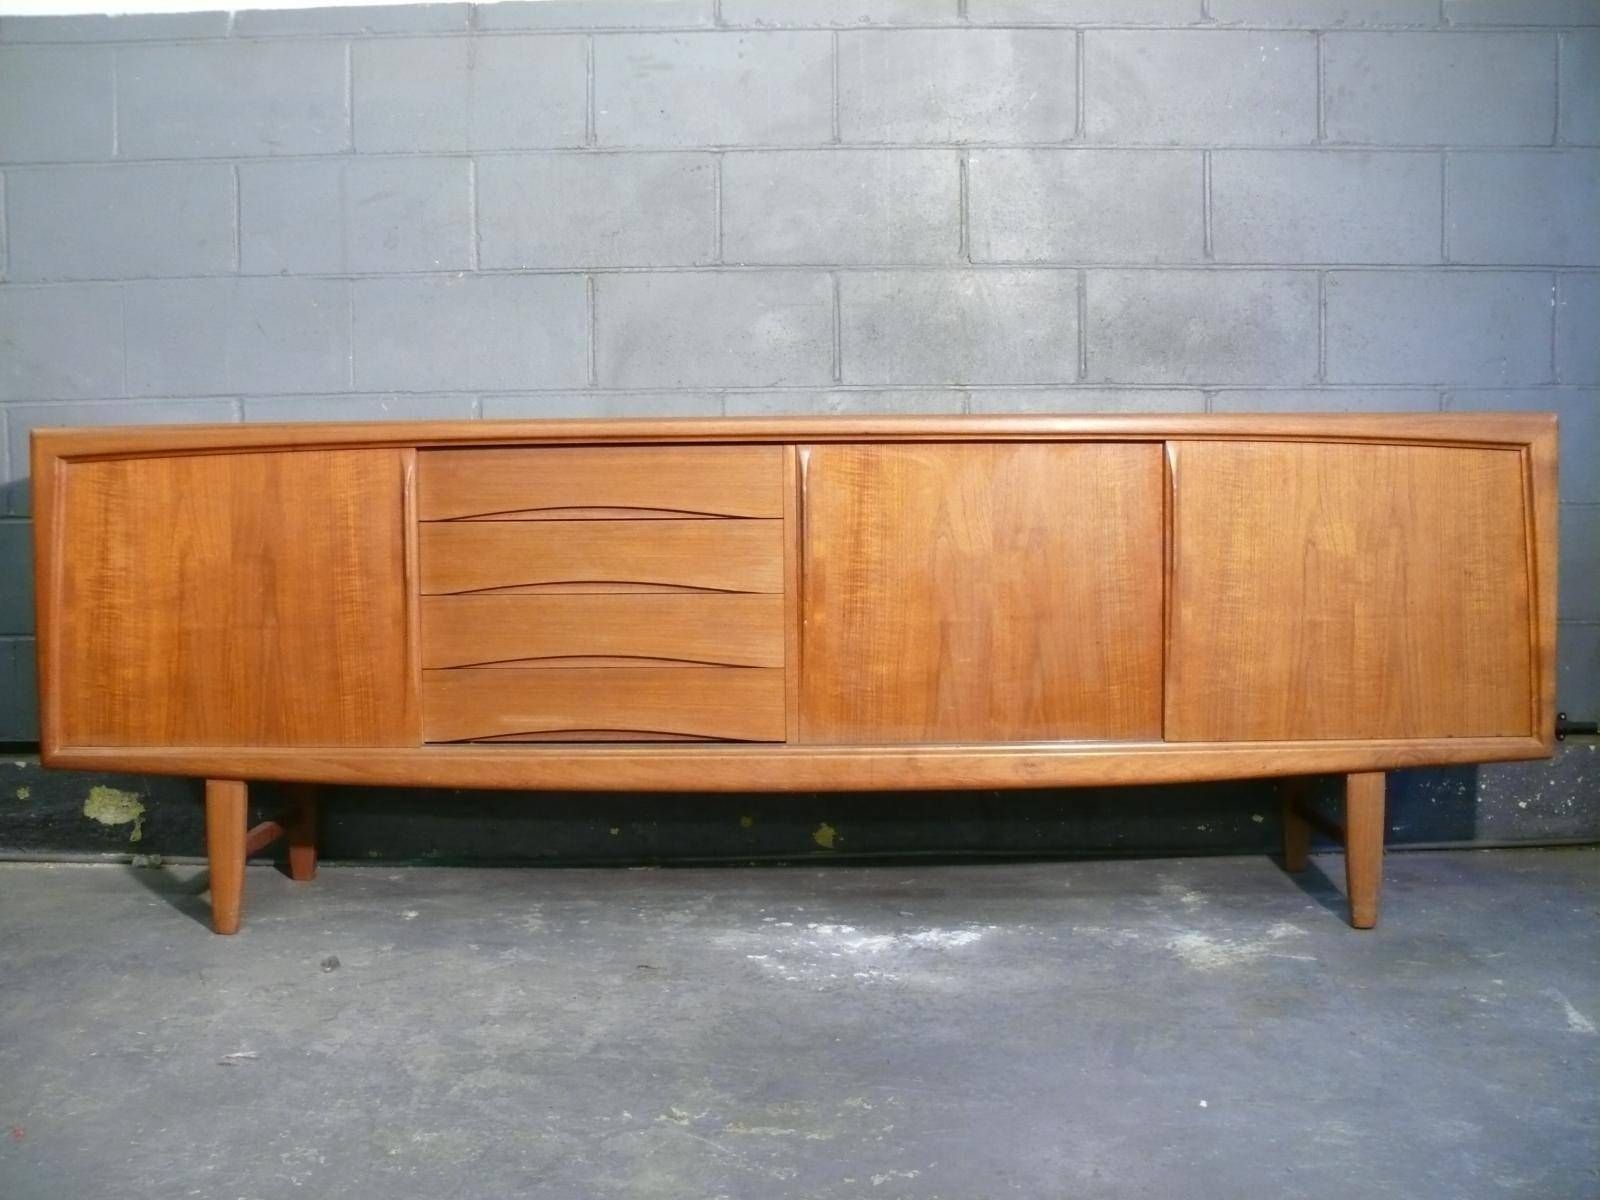 Teak Sideboard From Axel Christiansen, 1960s For Sale At Pamono Throughout Recent Teak Sideboards (View 3 of 15)